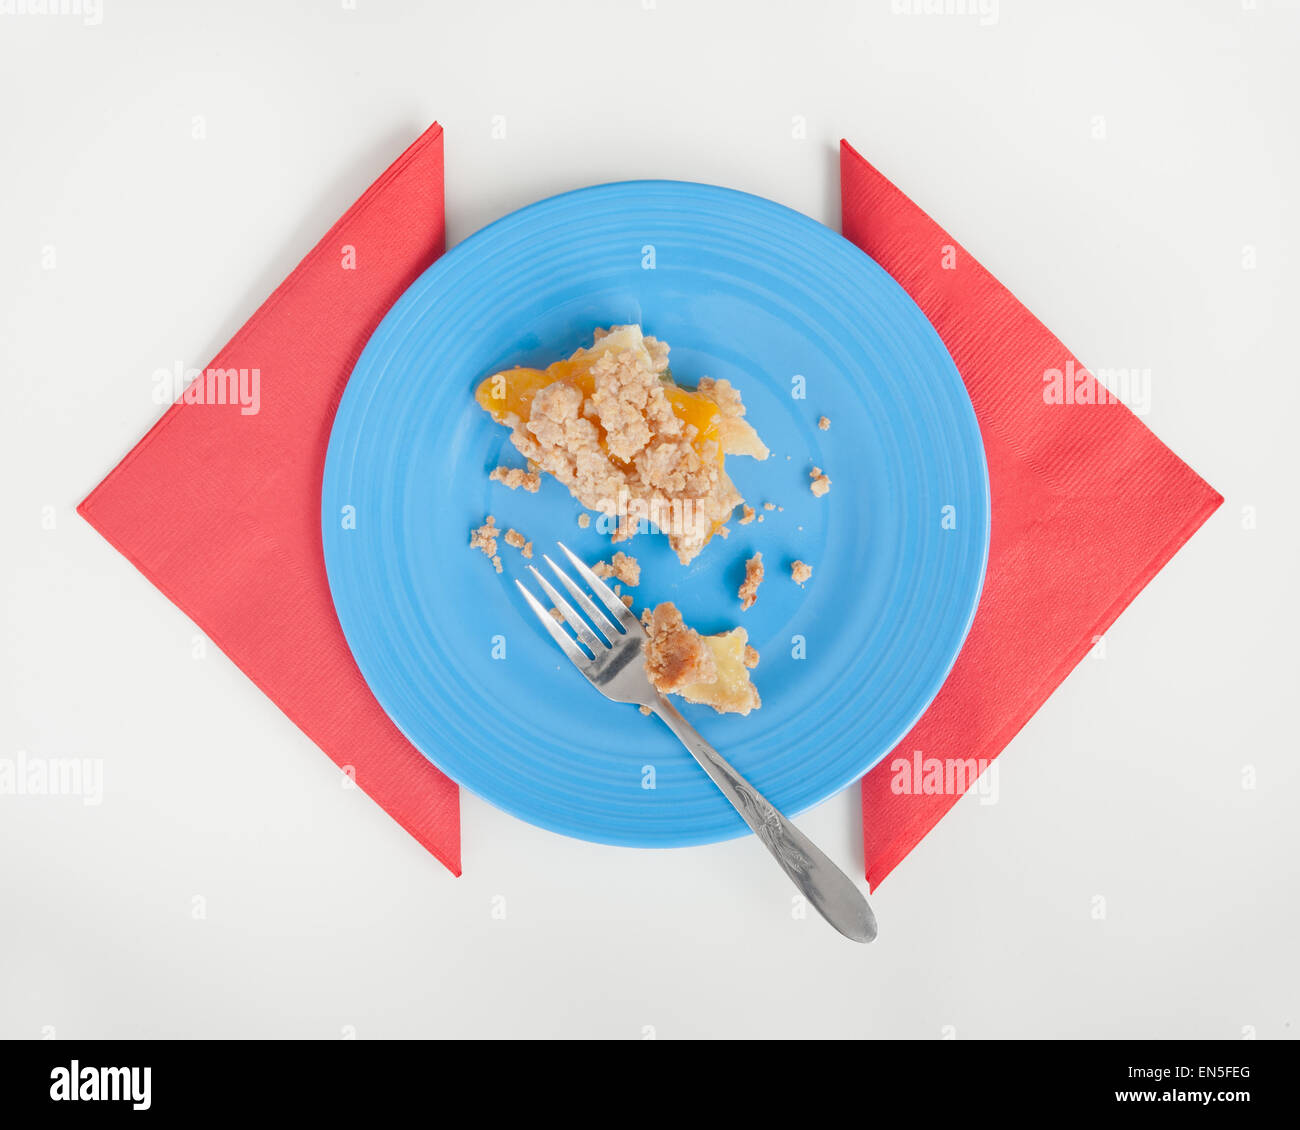 Peach Crumble pie leftovers on blue plate with red napkins. White table surface. Stock Photo